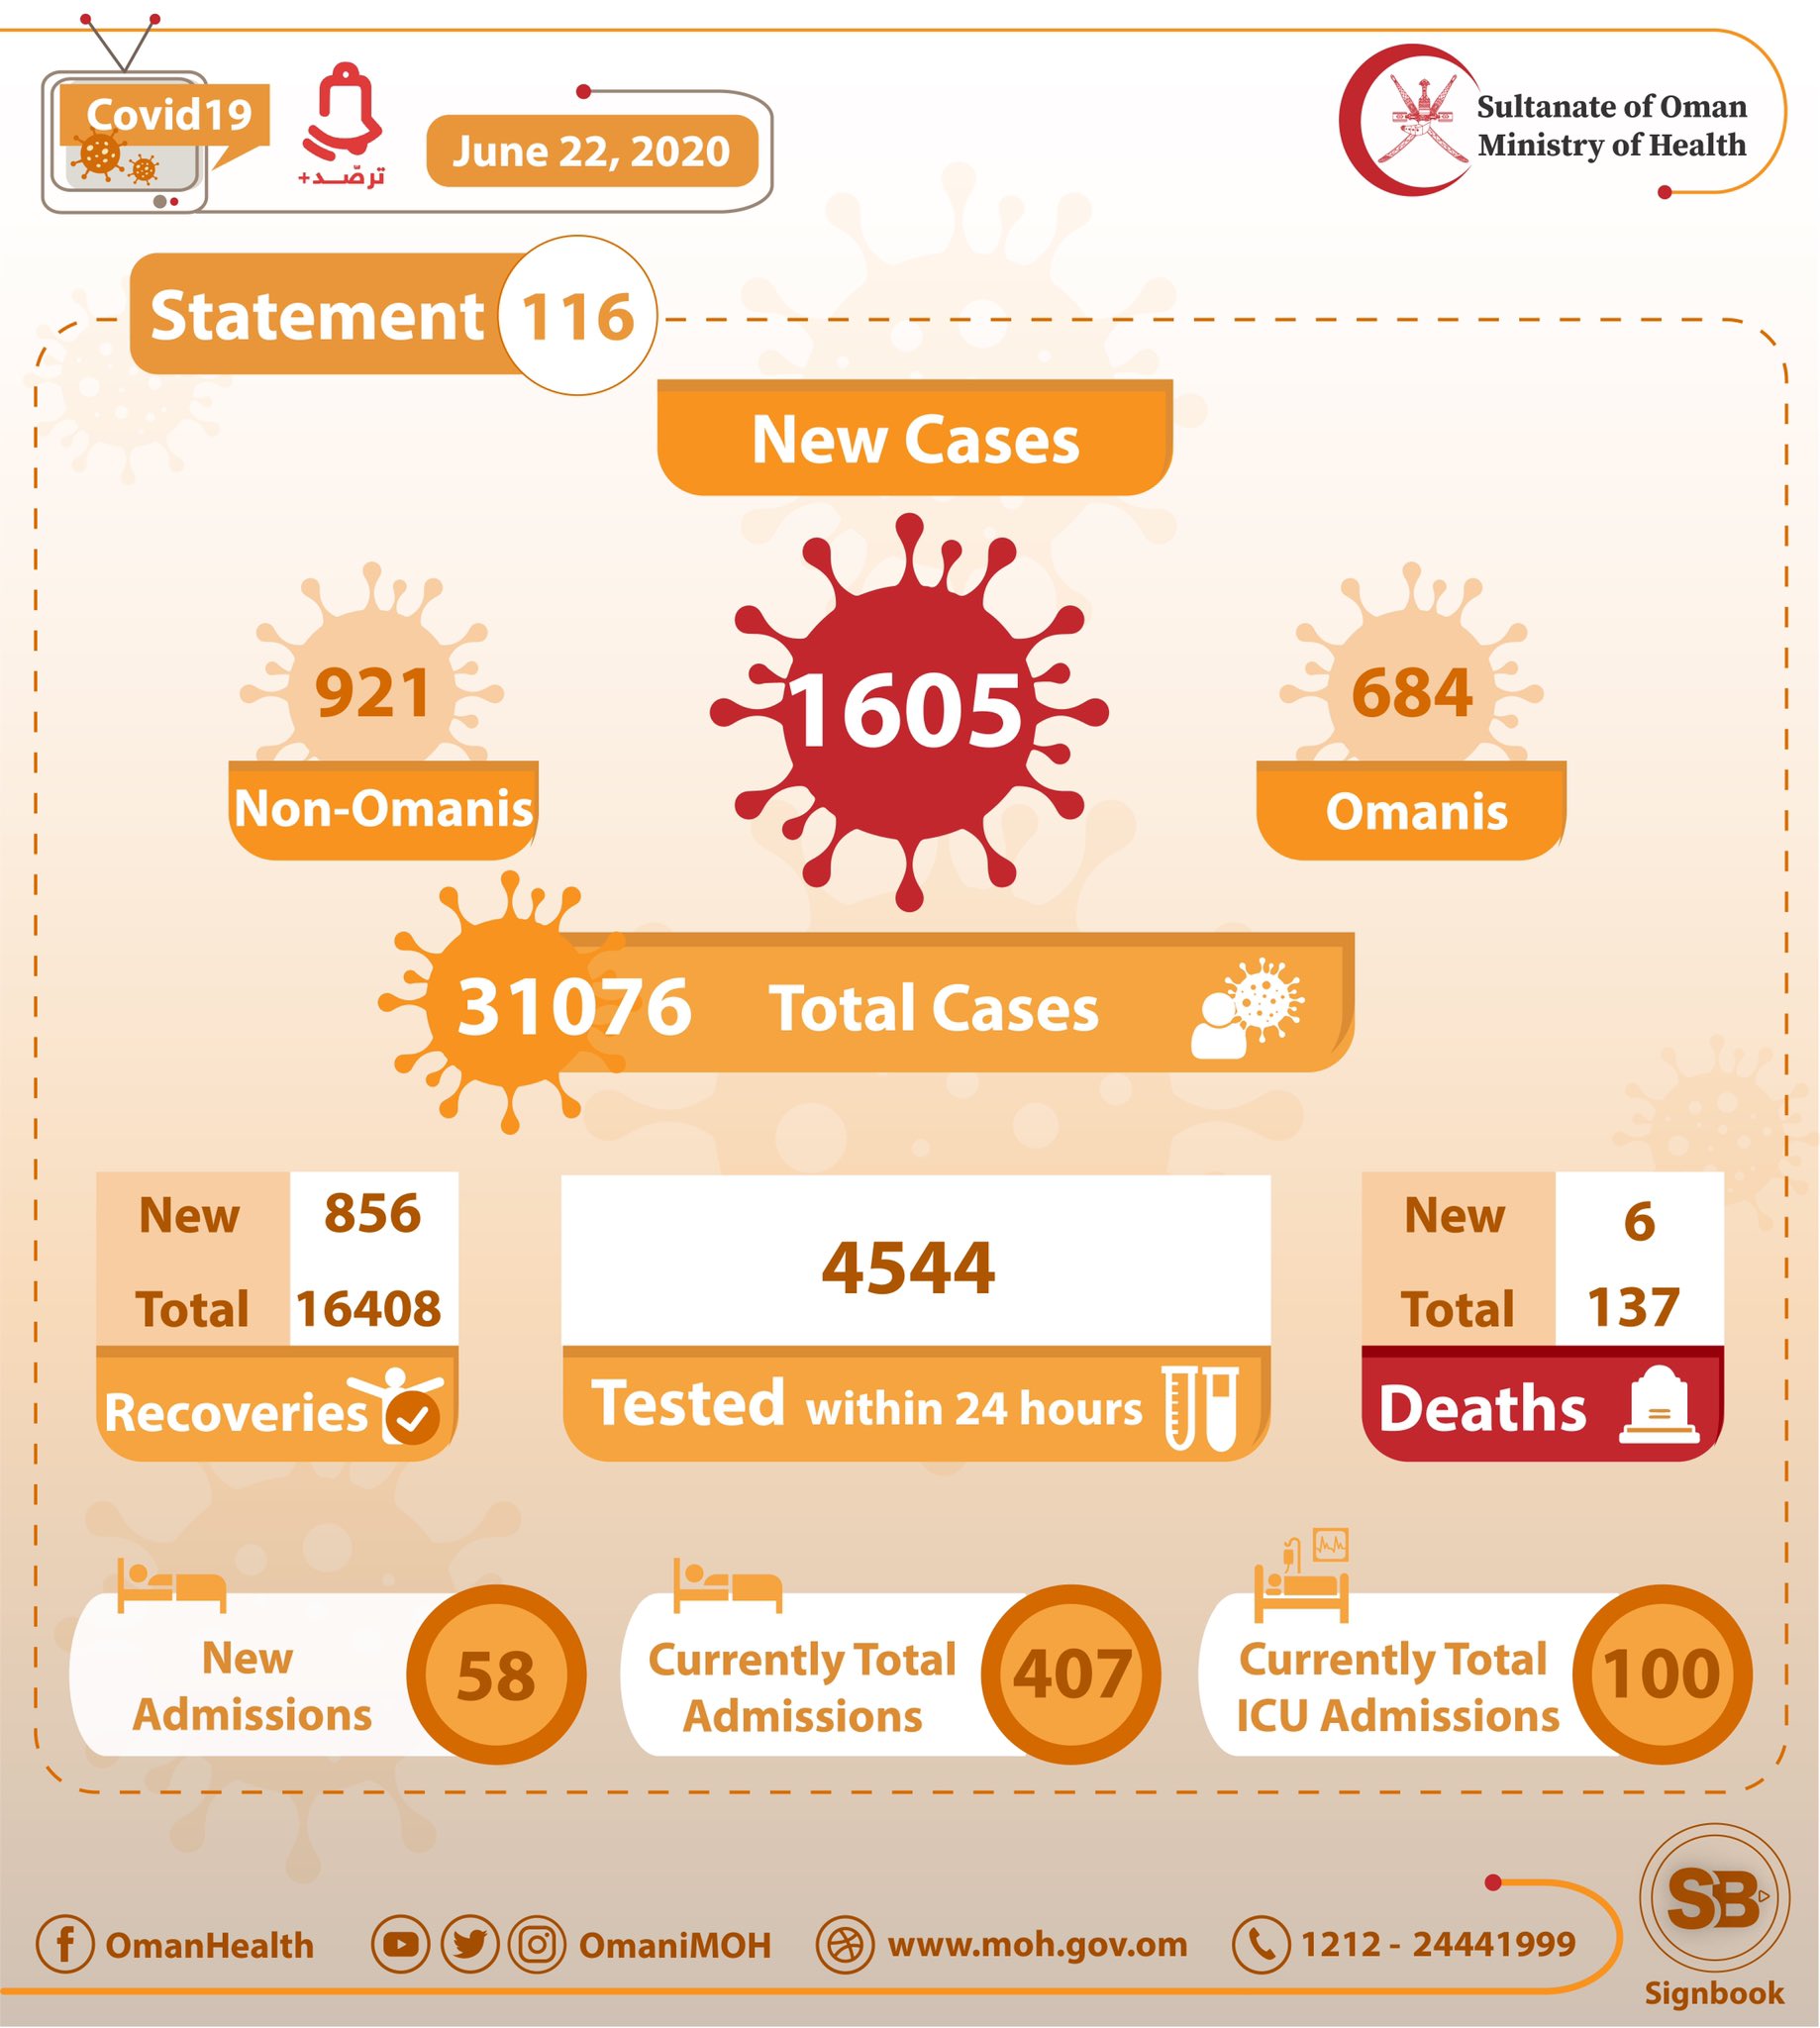  1605 New Cases Registered In Oman, Total Cases 31, 076